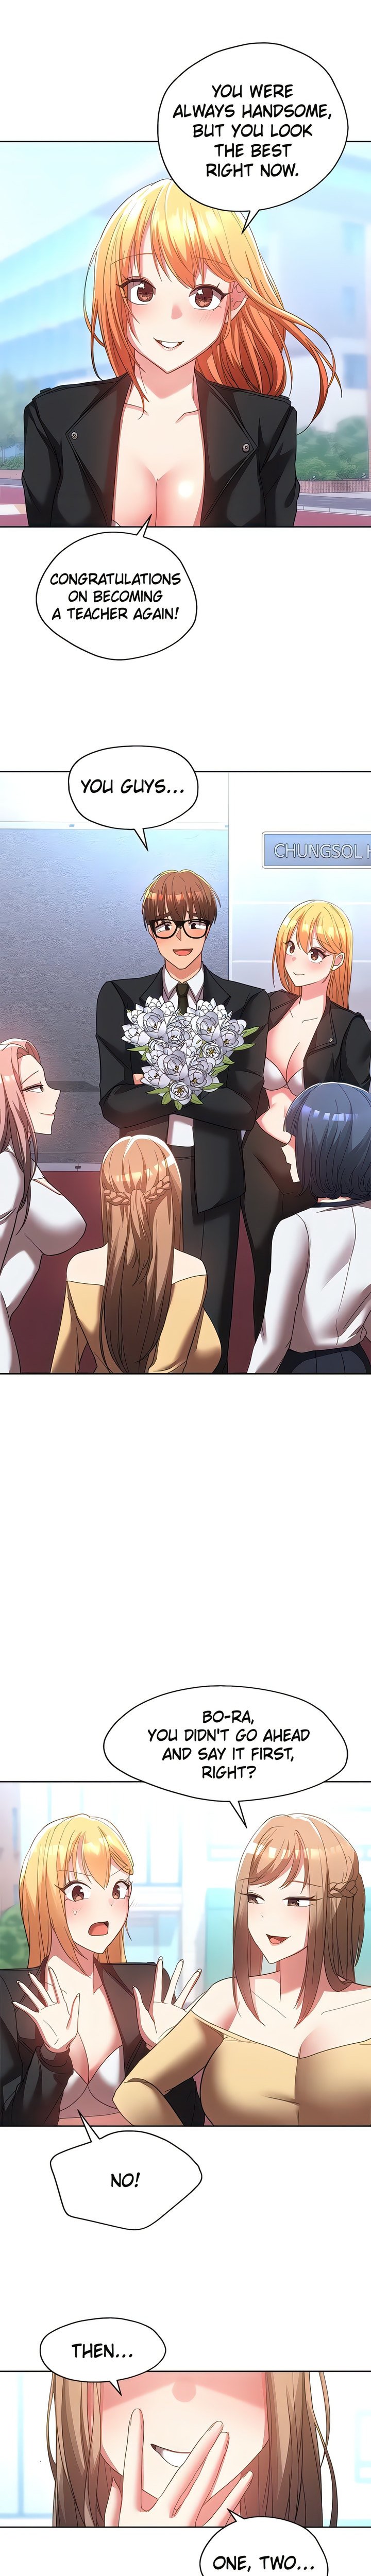 girls-i-used-to-teach-chap-41-17